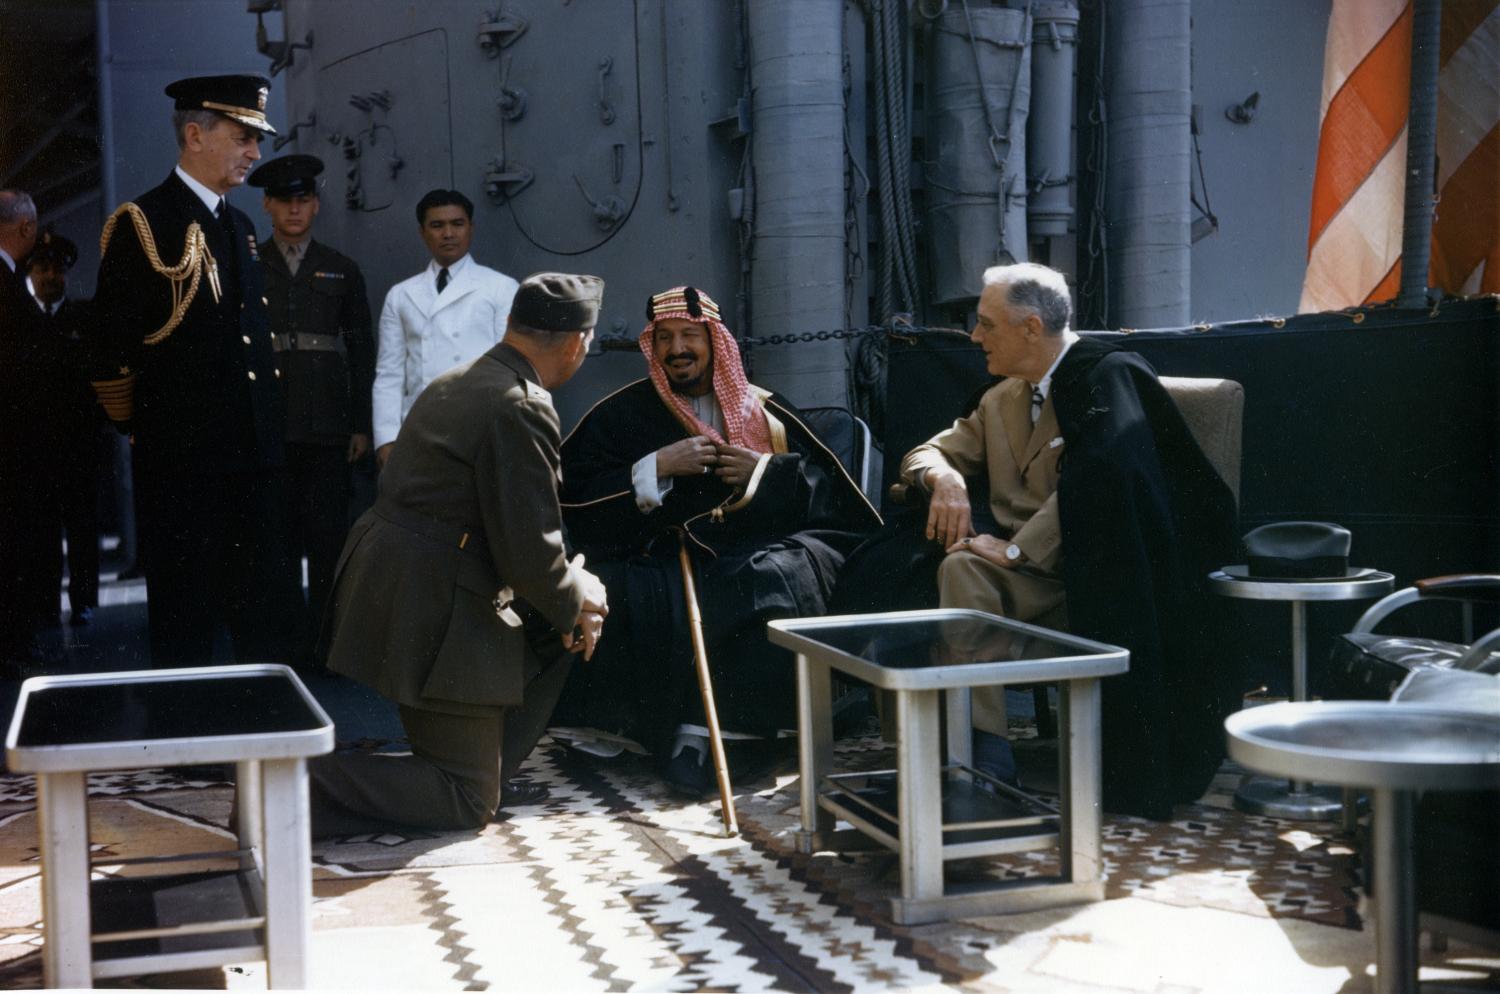 (right)  Meets with King Ibn Saud, of Saudi Arabia, on board USS Quincy (CA-71) in the Great Bitter Lake, Egypt, on 14 February 1945. The King is speaking to the interpreter, Colonel William A. Eddy, USMC. Fleet Admiral William D. Leahy, USN, the President's Aide and Chief of Staff, is at left. Note ornate carpet on the ship's deck, and life raft mounted on the side of the 5/38 twin gun mount in the background.  Photograph from the Army Signal Corps Collection in the U.S. National Archives.